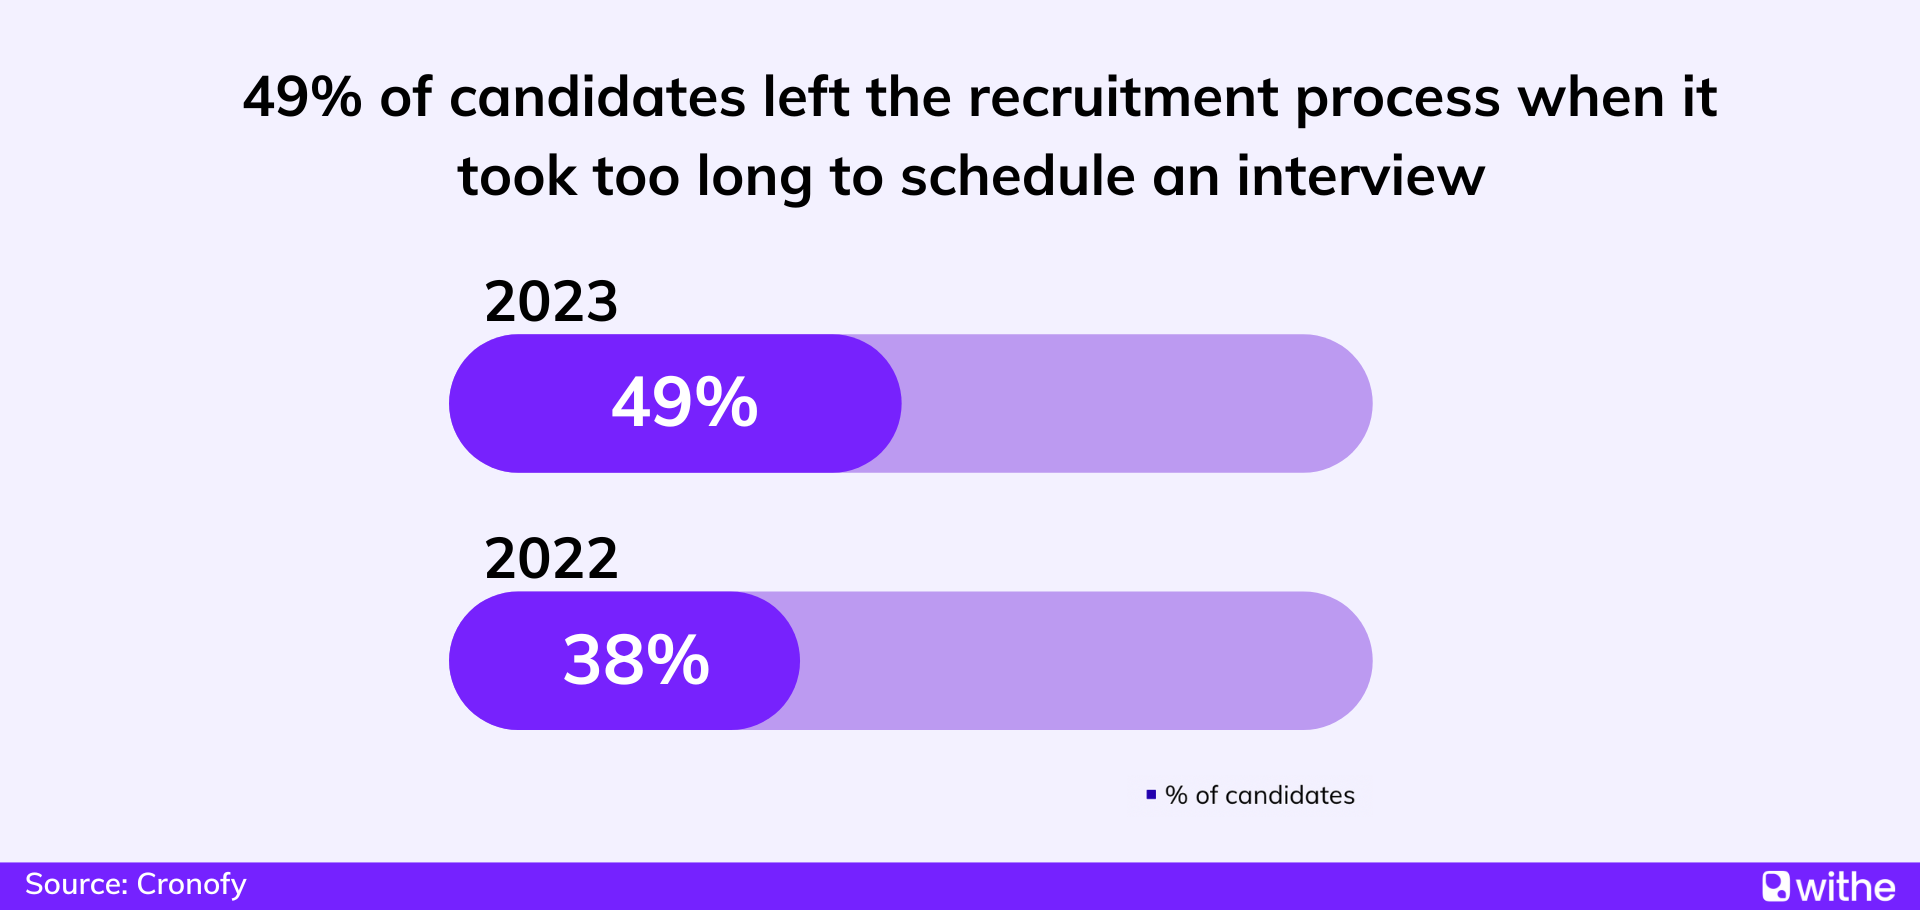 Candidate experience statistics - 49% of candidates left the recruitment process when it took too long to schedule an interview in 2023, compared to 38% in 2022